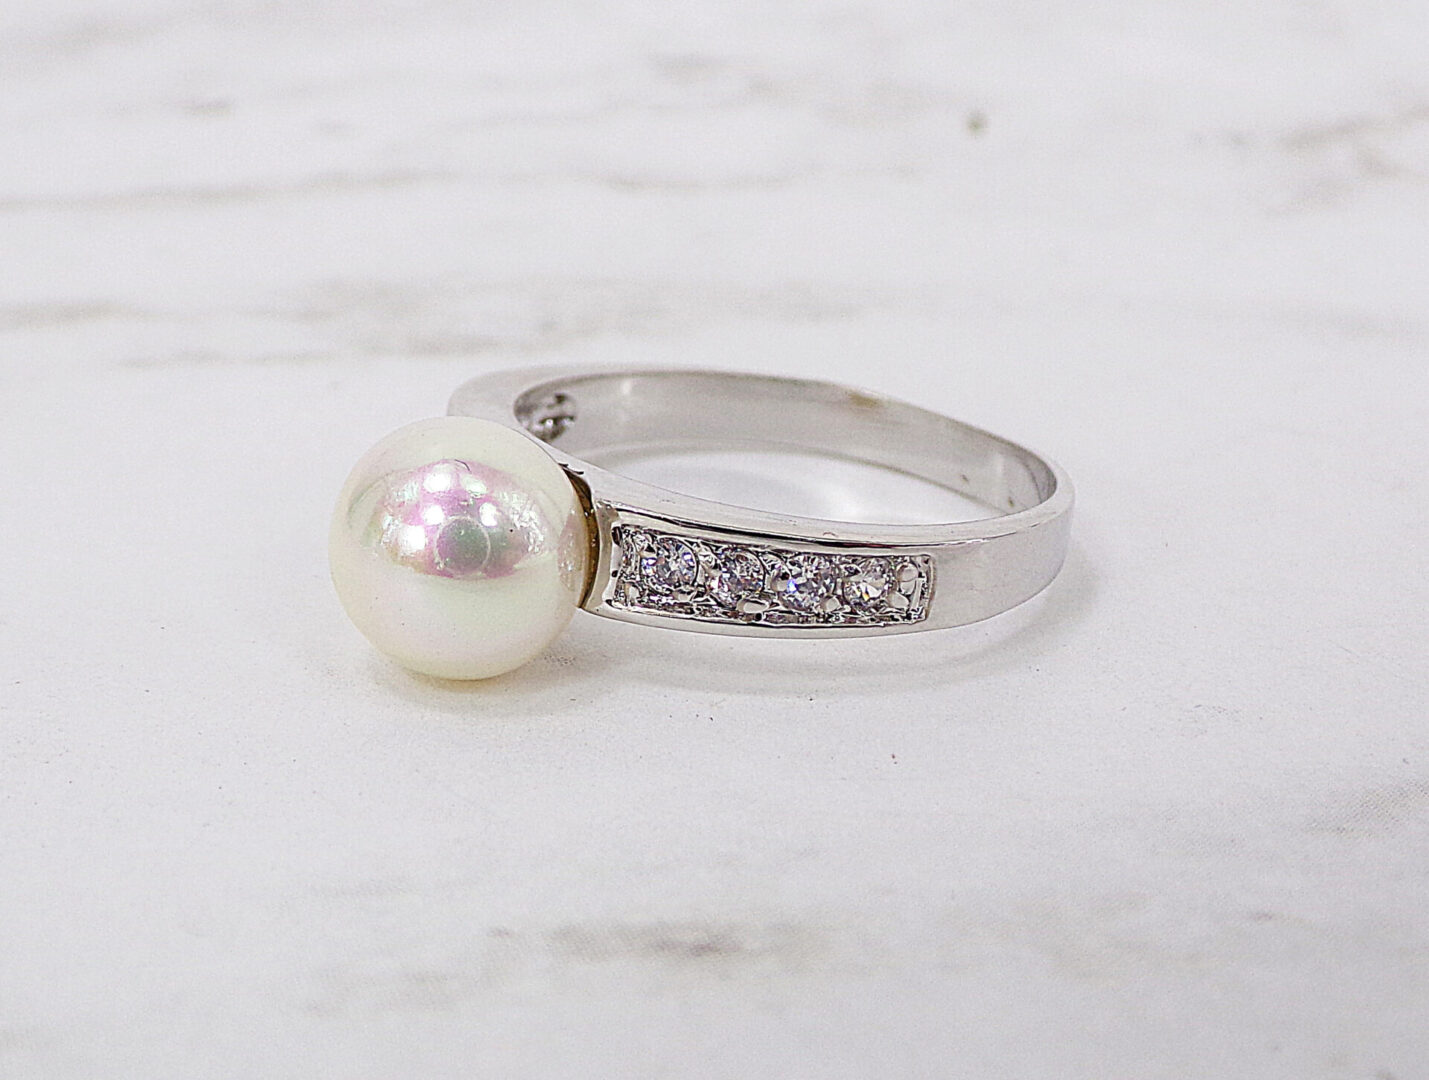 PEARL AND CUBIC ZIRCONIA STONE RING - Calisa Designs